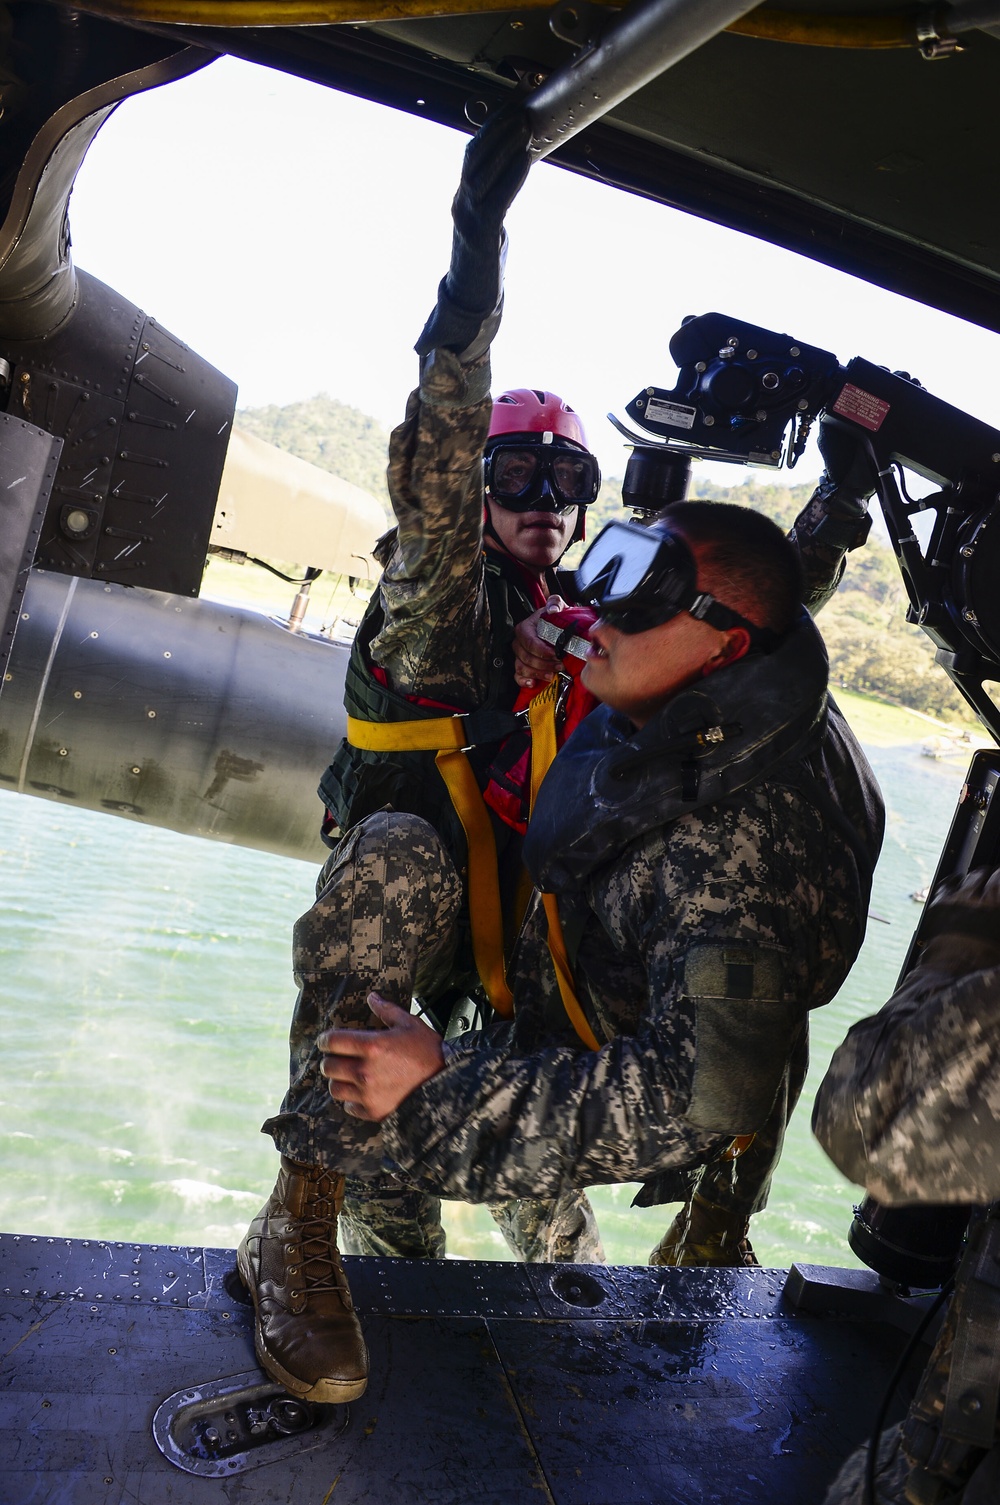 US Army Spec. Ops. aids 1-228th Avn. Reg. with overwater hoist training